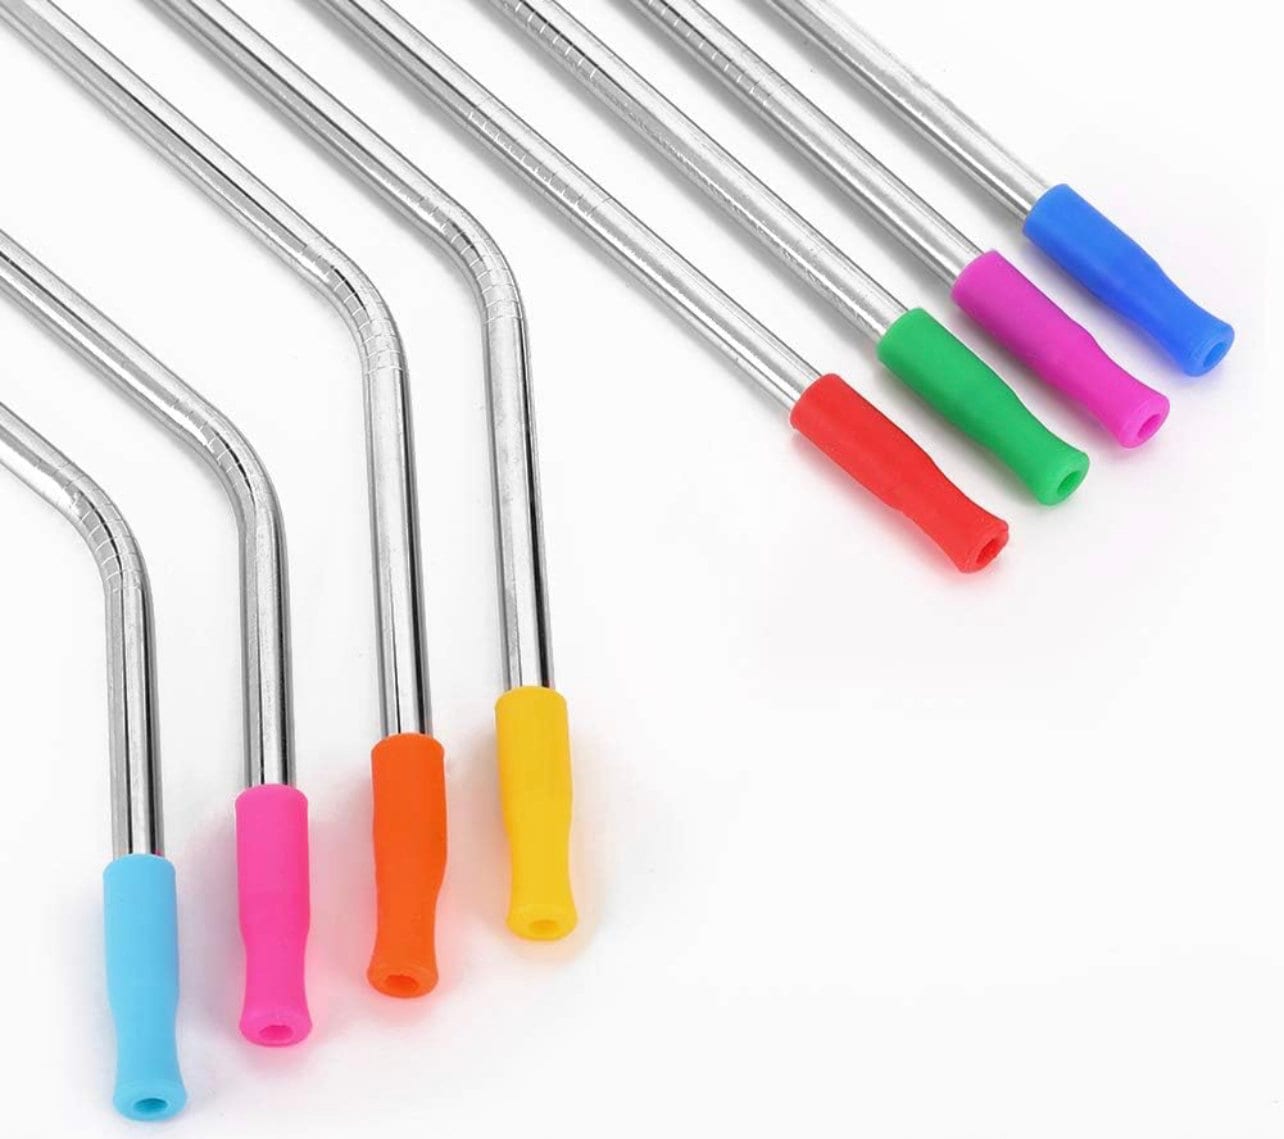 Food Grade Silicone Straw Tip for Stainless Steel Multicolored. 1 Reusable  Tip for Metal Rubber Straws Covers 6mm Size 